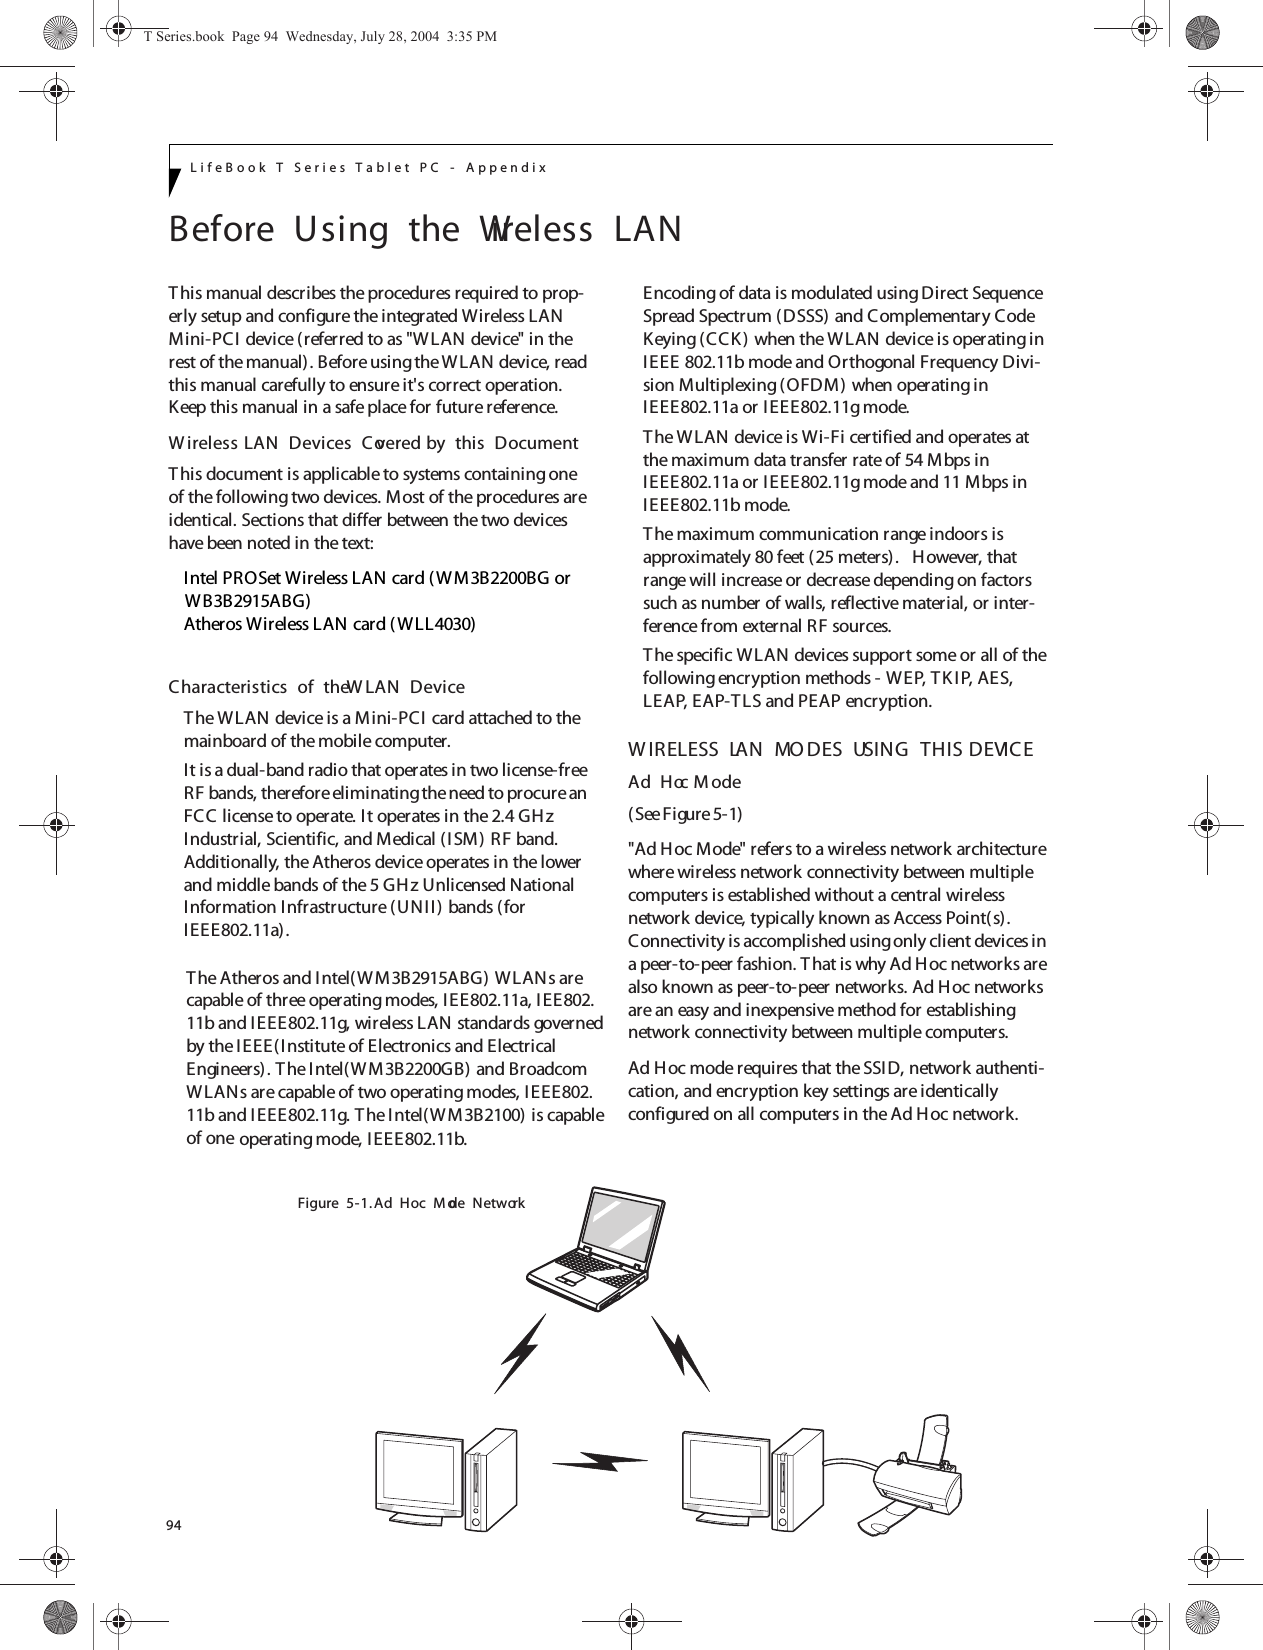 94LifeBook T Series Tablet PC - AppendixBefore  Using  the  Wireless  LANThis manual describes the procedures required to prop-erly setup and configure the integrated Wireless LAN Mini-PCI device (referred to as &quot;WLAN device&quot; in the rest of the manual). Before using the WLAN device, read this manual carefully to ensure it&apos;s correct operation. Keep this manual in a safe place for future reference.W ireless LAN  Devices  Covered by  this  DocumentThis document is applicable to systems containing one of the following two devices. Most of the procedures are identical. Sections that differ between the two devices have been noted in the text:Intel PROSet Wireless LAN card (WM3B2200BG orAtheros Wireless LAN card (WLL4030)Characteristics  of  the W LAN  DeviceThe WLAN device is a Mini-PCI card attached to the mainboard of the mobile computer. It is a dual-band radio that operates in two license-free RF bands, therefore eliminating the need to procure an FCC license to operate. It operates in the 2.4 GH z Industrial, Scientific, and Medical (ISM) RF band. Additionally, the Atheros device operates in the lower and middle bands of the 5 GH z Unlicensed National Information Infrastructure (UNII) bands (for IEEE802.11a).  operating mode, IEEE802.11b.Encoding of data is modulated using Direct Sequence Spread Spectrum (DSSS) and Complementary Code Keying (CCK ) when the W LAN device is operating in IEEE 802.11b mode and Orthogonal Frequency Divi-sion Multiplexing (OFDM) when operating in IEEE802.11a or IEEE802.11g mode. The WLAN device is Wi-Fi certified and operates at the maximum data transfer rate of 54 Mbps in IEEE802.11a or IEEE802.11g mode and 11 Mbps in IEEE802.11b mode.The maximum communication range indoors is approximately 80 feet (25 meters).   However, that range will increase or decrease depending on factors such as number of walls, reflective material, or inter-ference from external RF sources.The specific WLAN devices support some or all of the following encryption methods - WEP, TKIP, AES, LEAP, EAP-TLS and PEAP encryption.W IRELESS  LAN  MO DES  USING  THIS  DEVICEAd  Hoc M ode (See Figure 5-1)&quot;Ad Hoc Mode&quot; refers to a wireless network architecture where wireless network connectivity between multiple computers is established without a central wireless network device, typically known as Access Point(s). Connectivity is accomplished using only client devices in a peer-to-peer fashion. T hat is why Ad Hoc networks are also known as peer-to-peer networks. Ad Hoc networks are an easy and inexpensive method for establishing network connectivity between multiple computers.Ad Hoc mode requires that the SSID, network authenti-cation, and encryption key settings are identically configured on all computers in the Ad Hoc network. Figure  5-1. Ad  Hoc  M ode  NetworkT Series.book  Page 94  Wednesday, July 28, 2004  3:35 PMWB3B2915ABG)The Atheros and Intel(WM3B2915ABG) WLANs arecapable of three operating modes, IEE802.11a, IEE802.11b and IEEE802.11g, wireless LAN standards governedby the IEEE(Institute of Electronics and Electrical Engineers). T he Intel(W M3B2200GB) and Broadcom WLANs are capable of two operating modes, IEEE802.11b and IEEE802.11g. T he Intel(WM3B2100) is capableof one